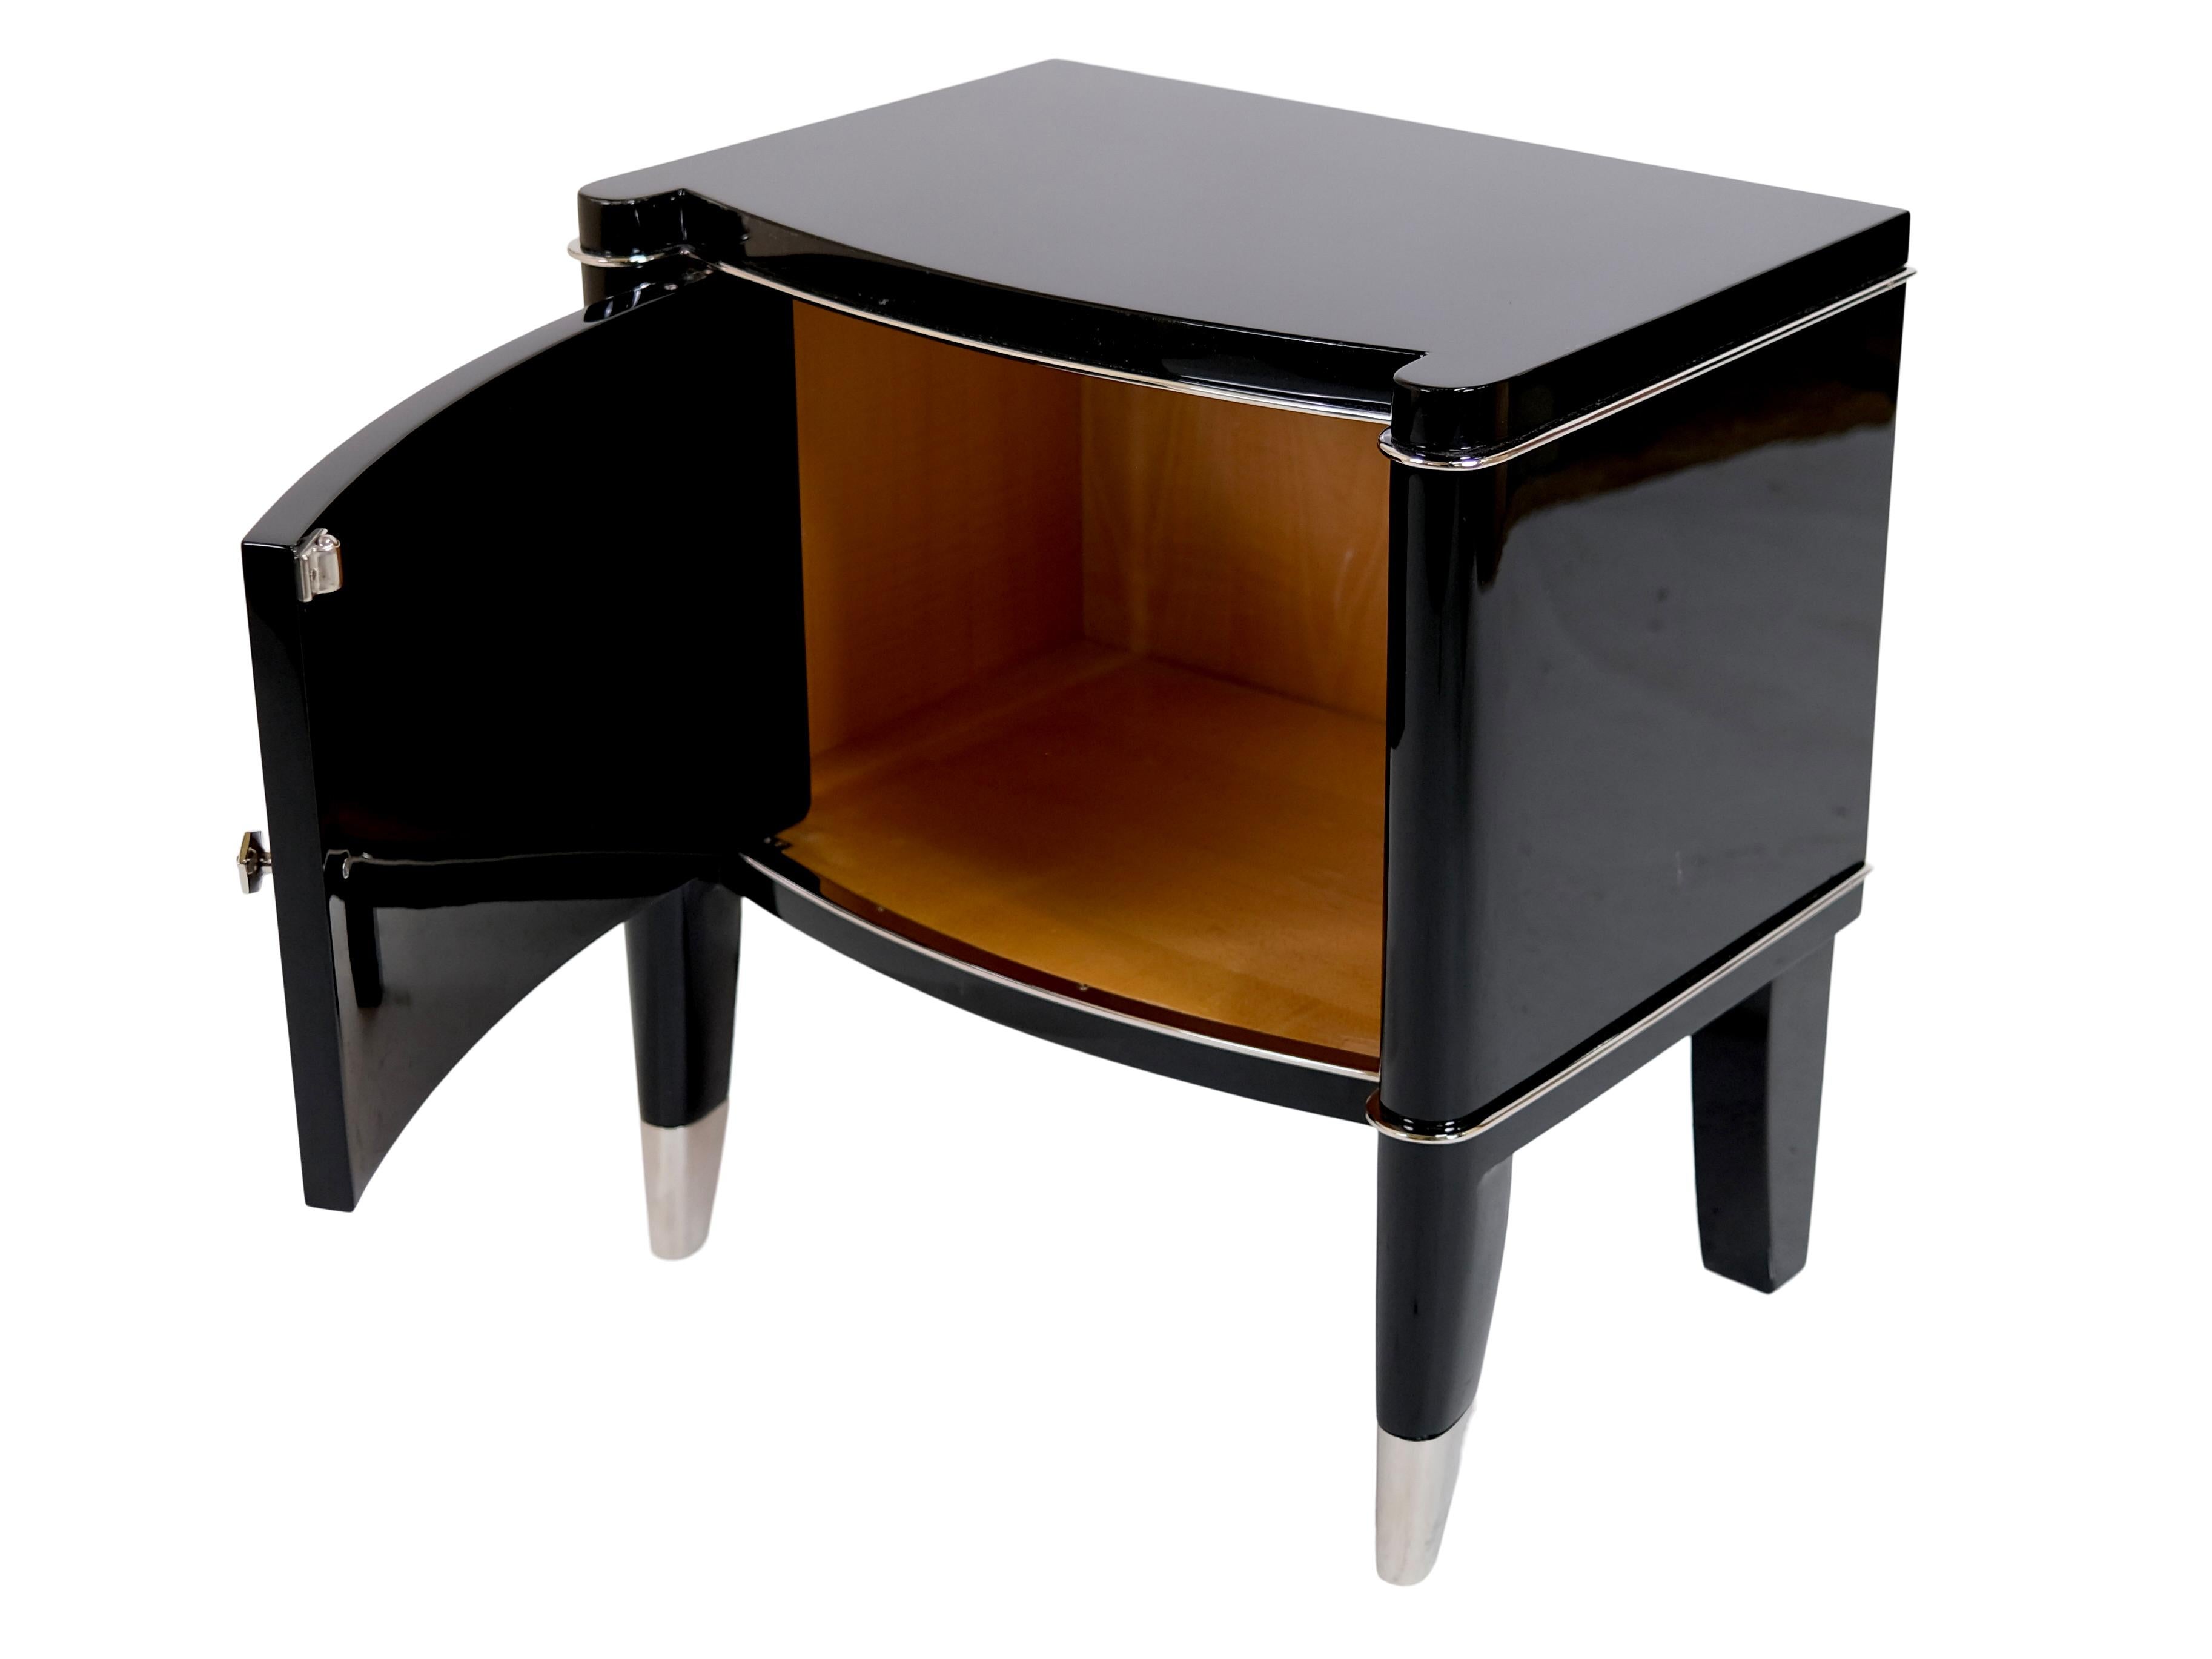 Belgian Pair of Art Deco Night Stands in Black Lacquer from De Coene Frères 1940s